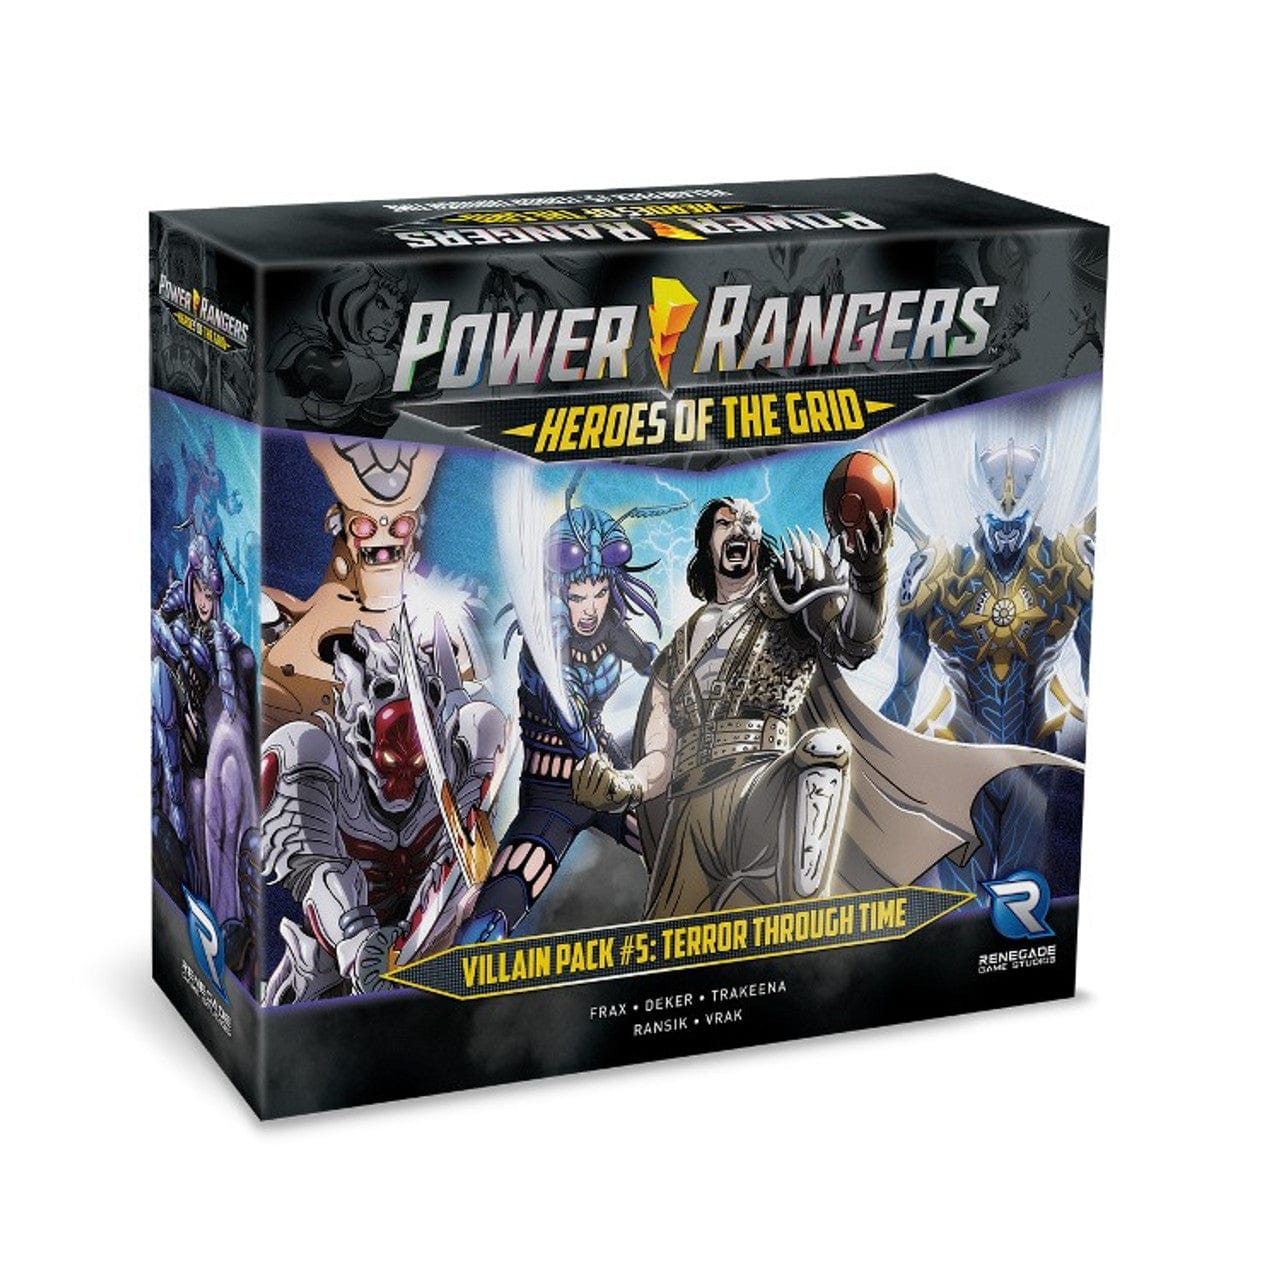 Power Rangers - Heroes of the Grid: Villain Pack #5 - Terror Through Time